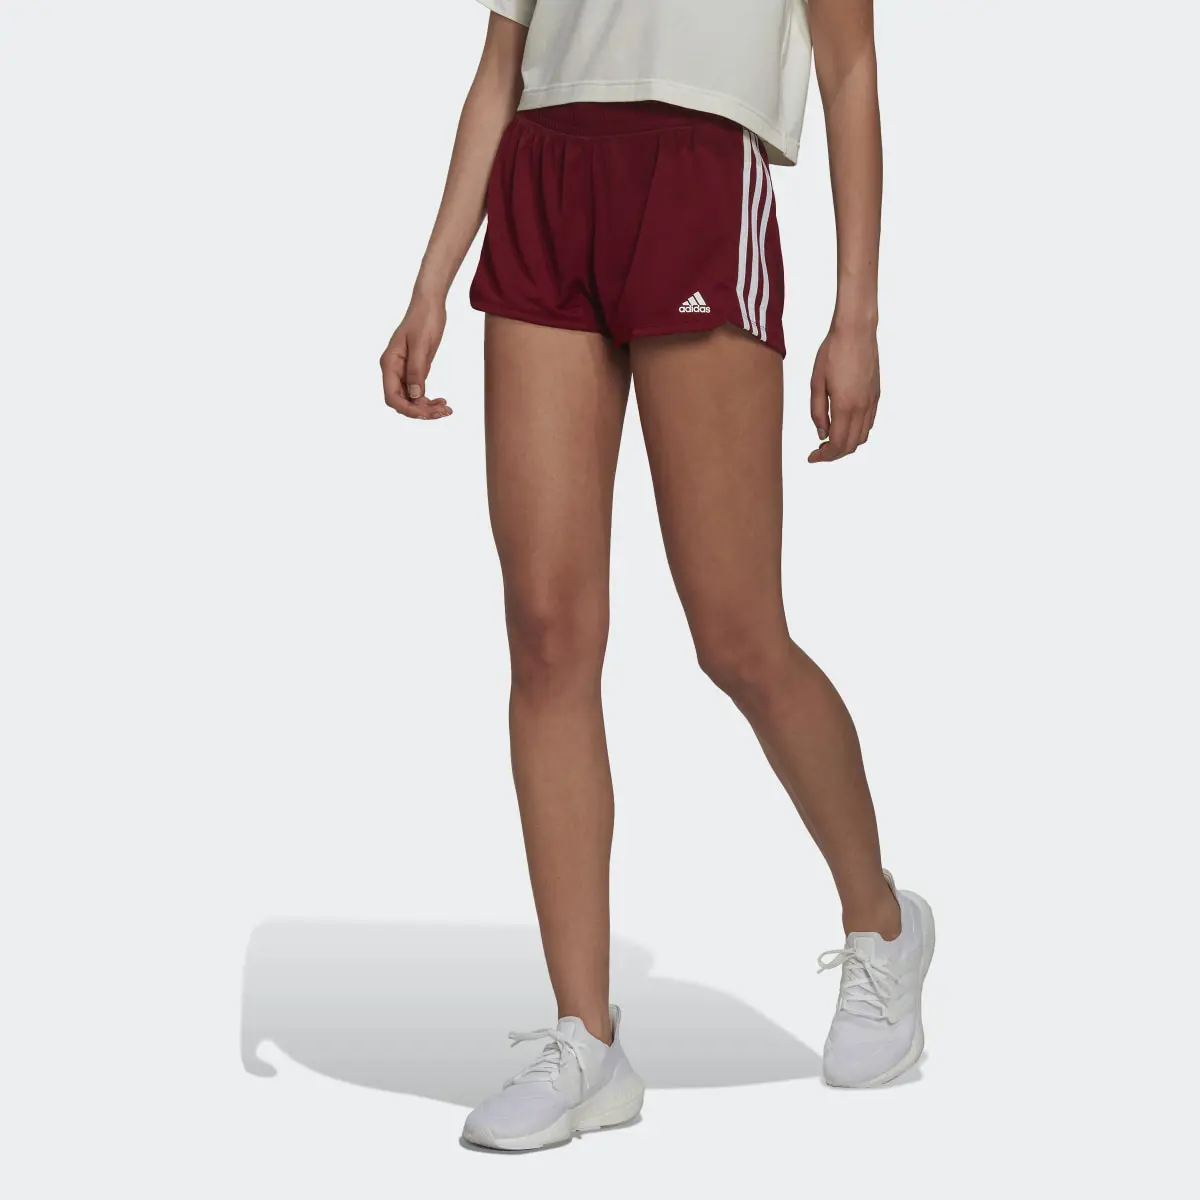 Adidas Short Pacer 3-Stripes Knit. 1